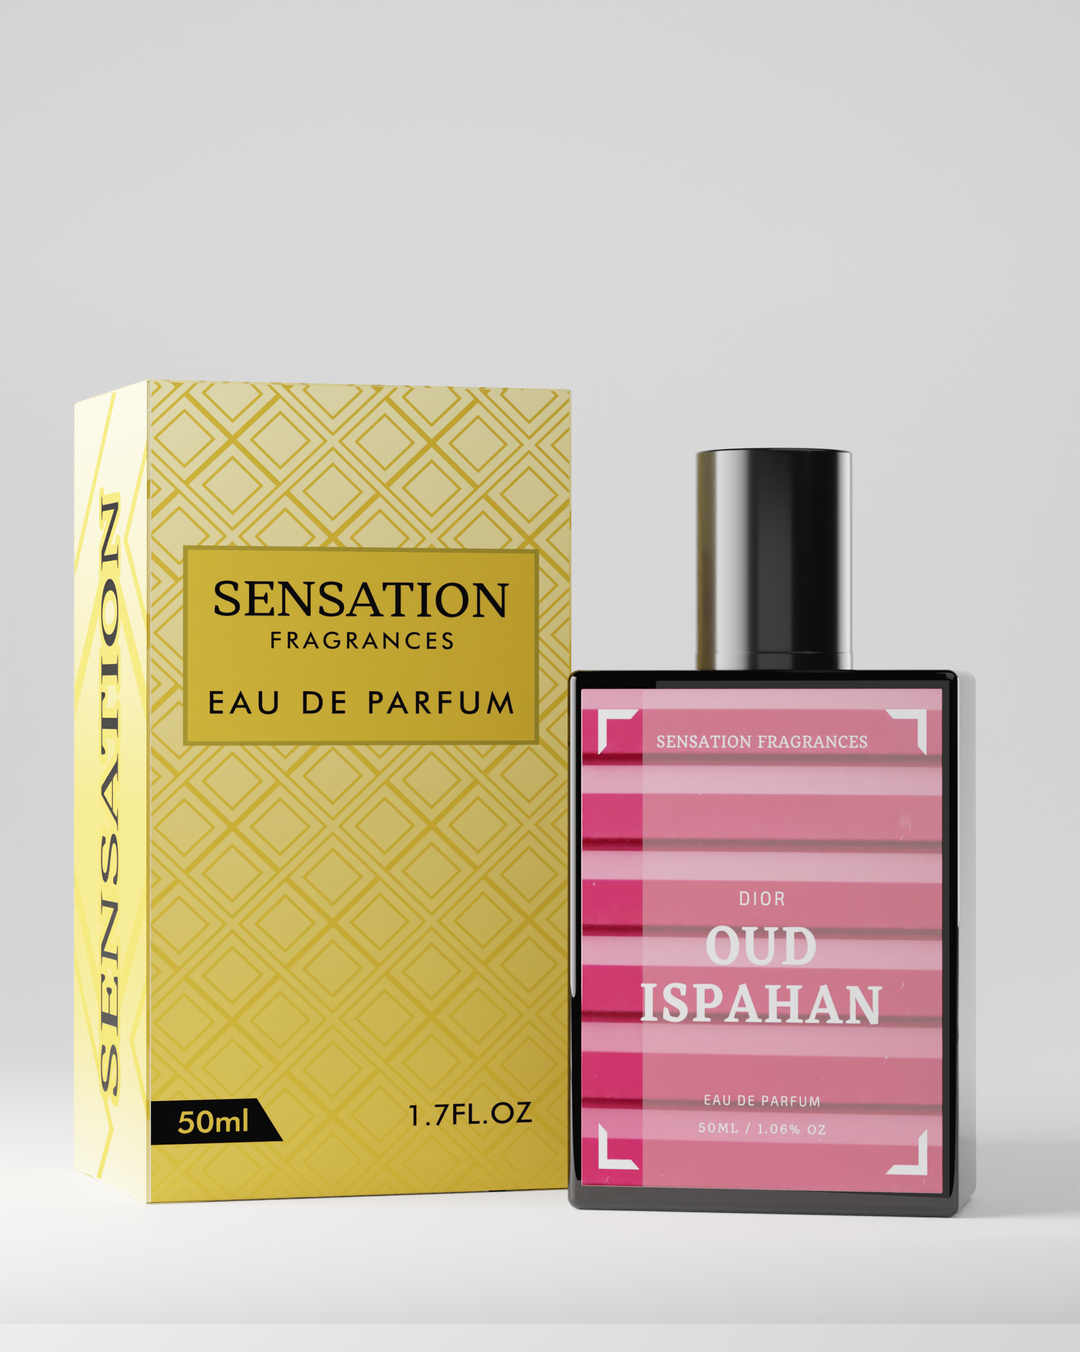 Our Impression of - OUD ISPAHAN